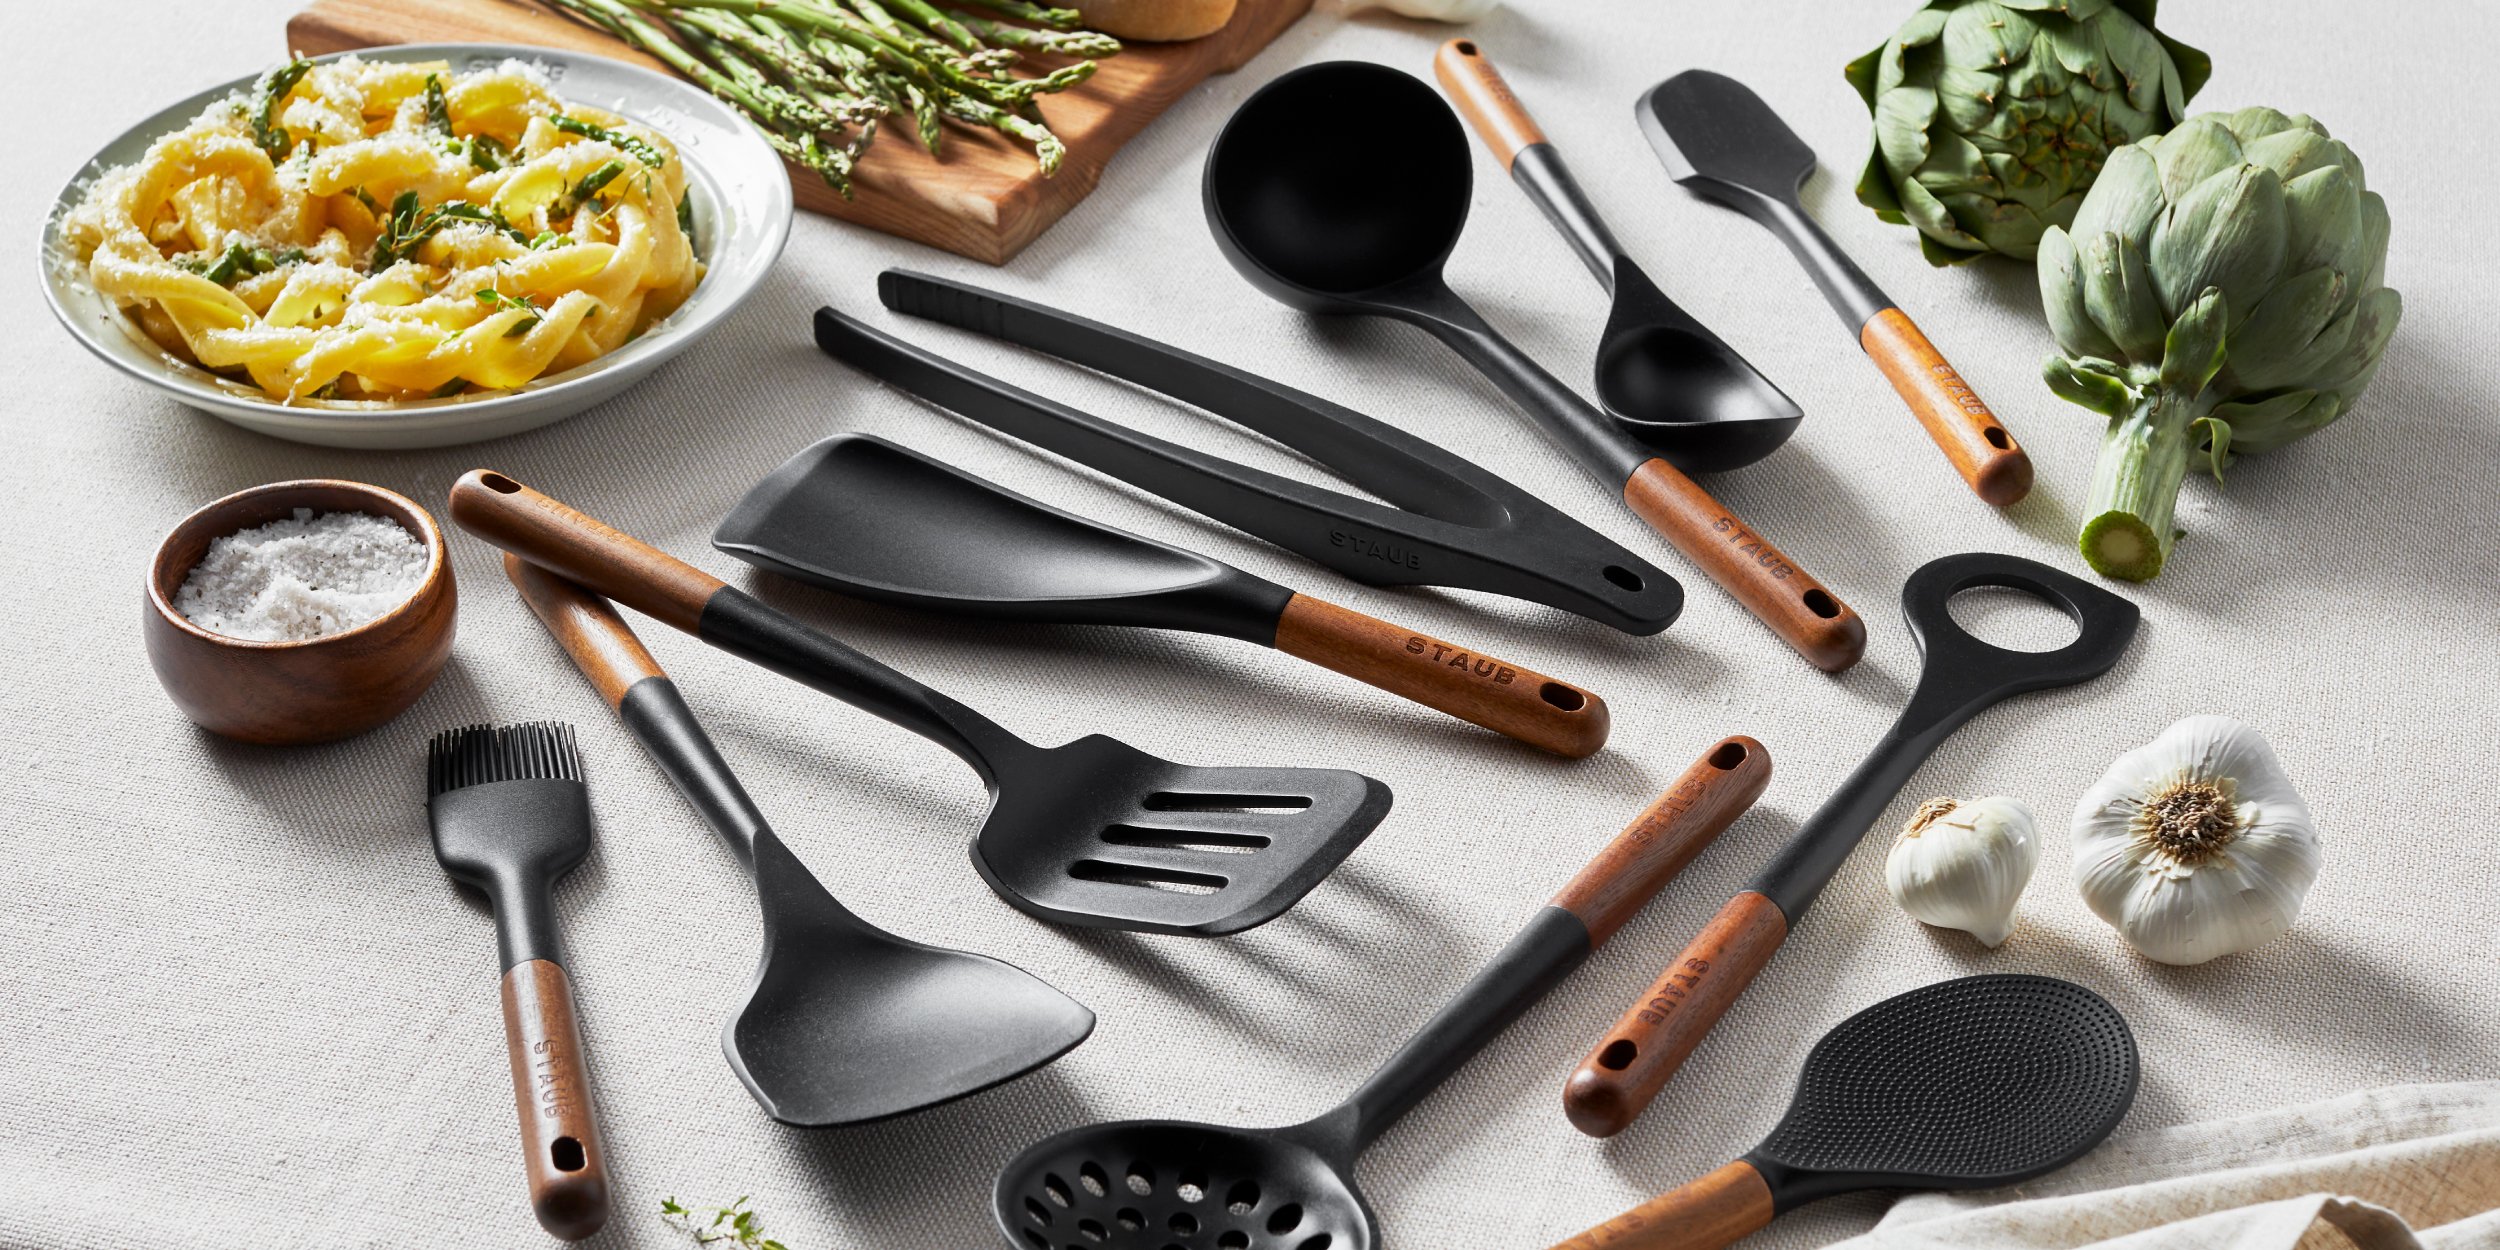 https://www.zwilling.com/on/demandware.static/-/Sites-zwilling-us-Library/default/dwa958d59f/images/product-content/masonry-content/staub/tools/StaubToolsMasonry_1200-600.jpg